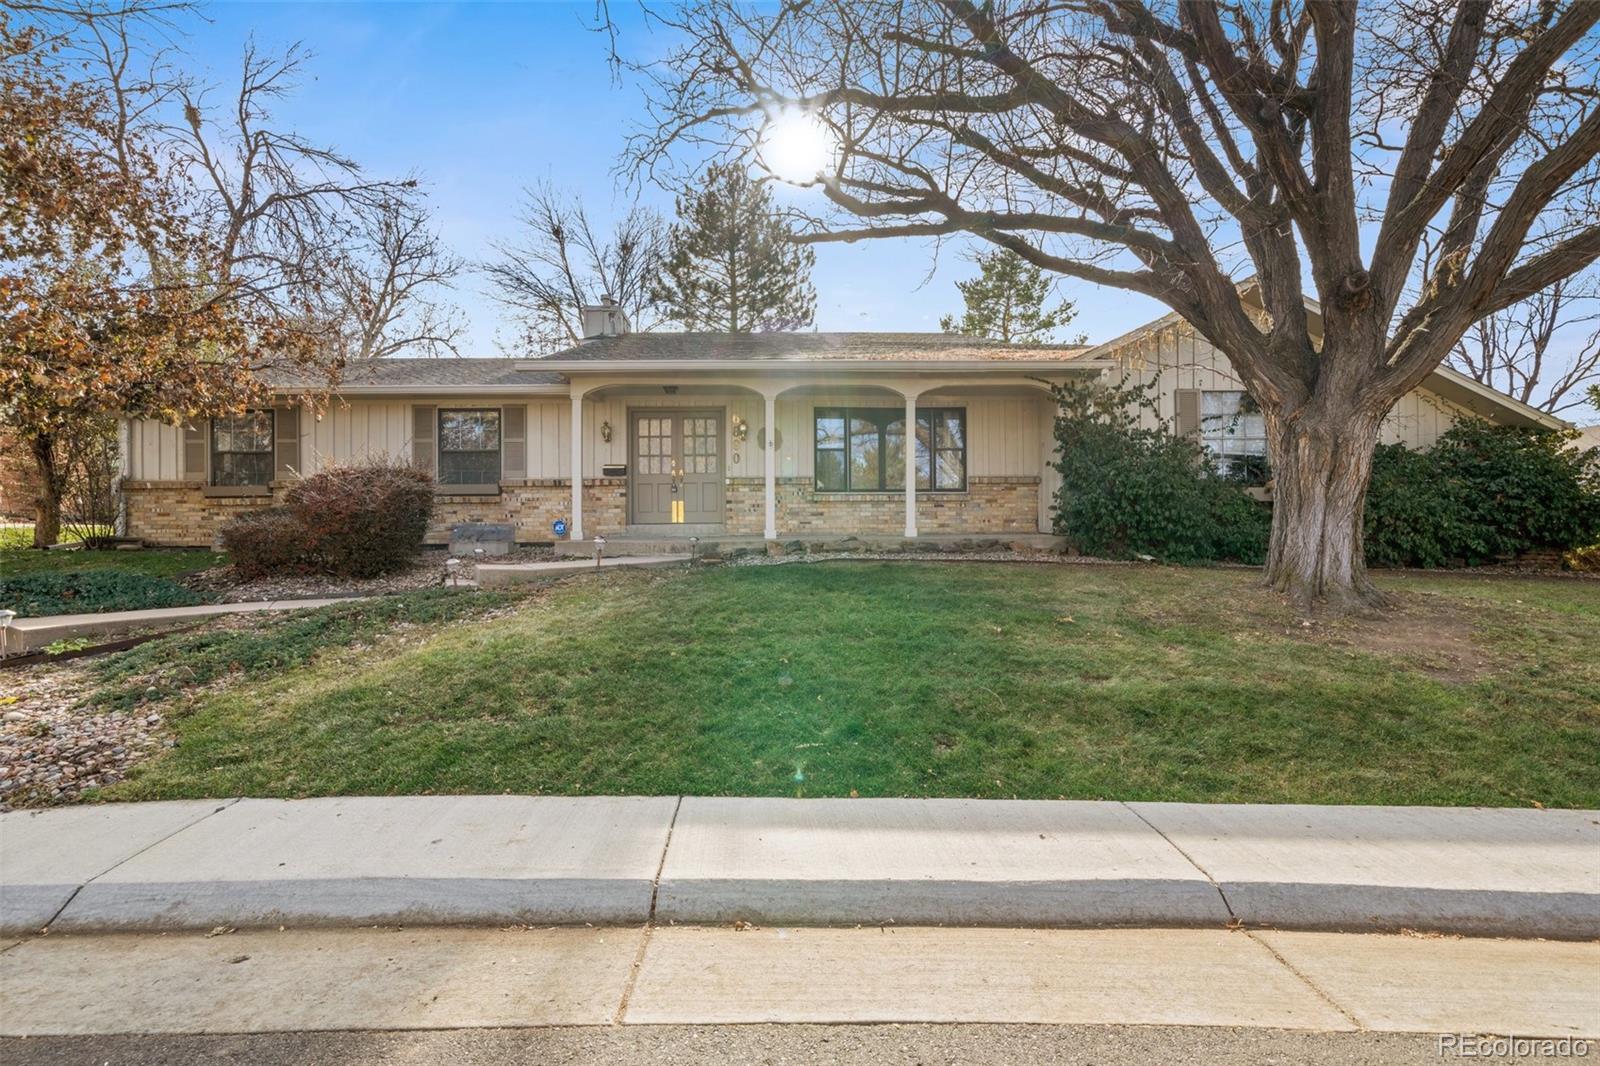 6890 s elizabeth circle, Centennial sold home. Closed on 2023-12-21 for $690,000.